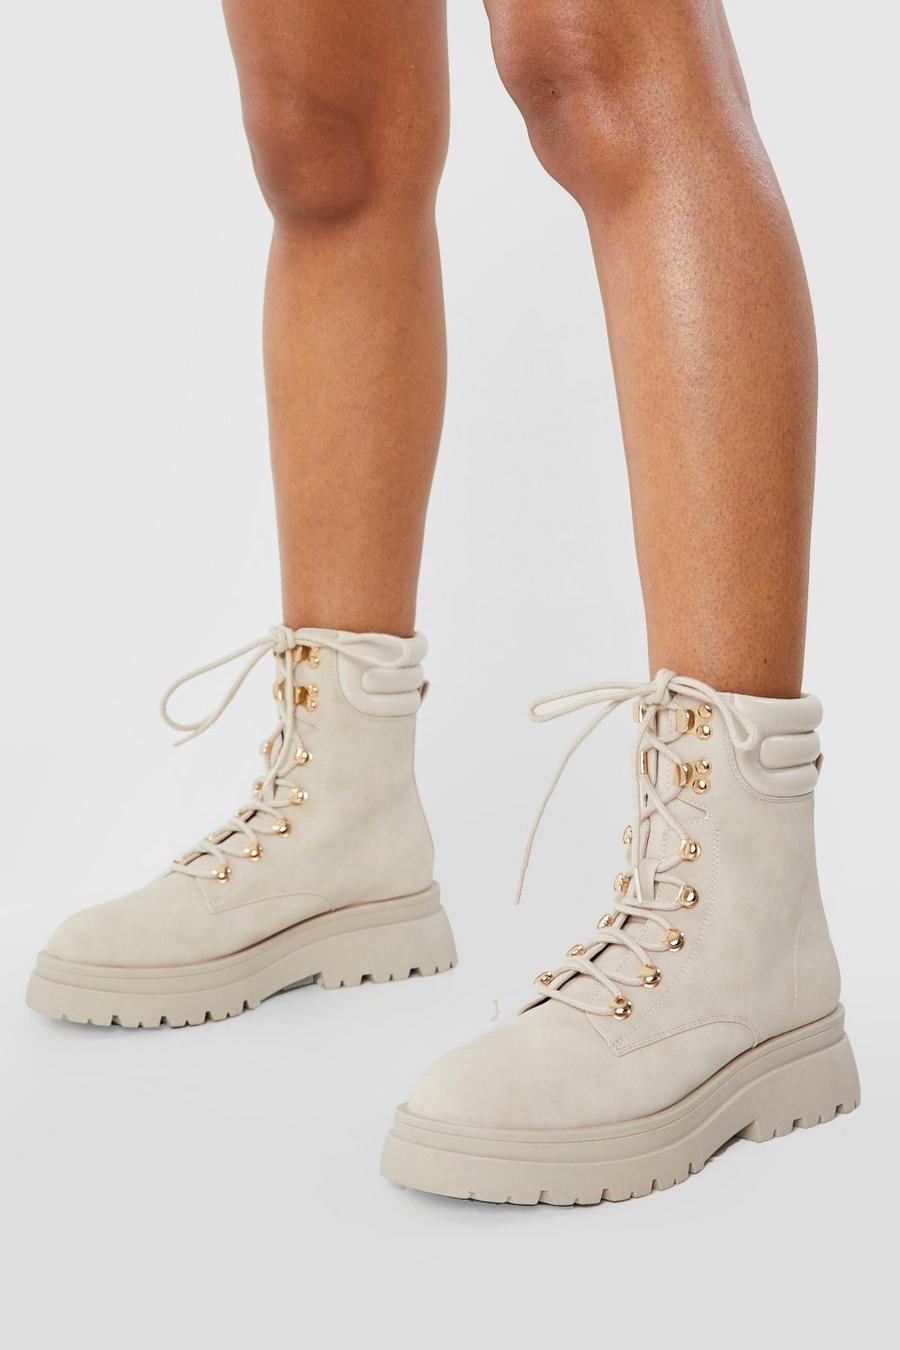 Beige beis Cleated Sole Lace Up Hiker Boots